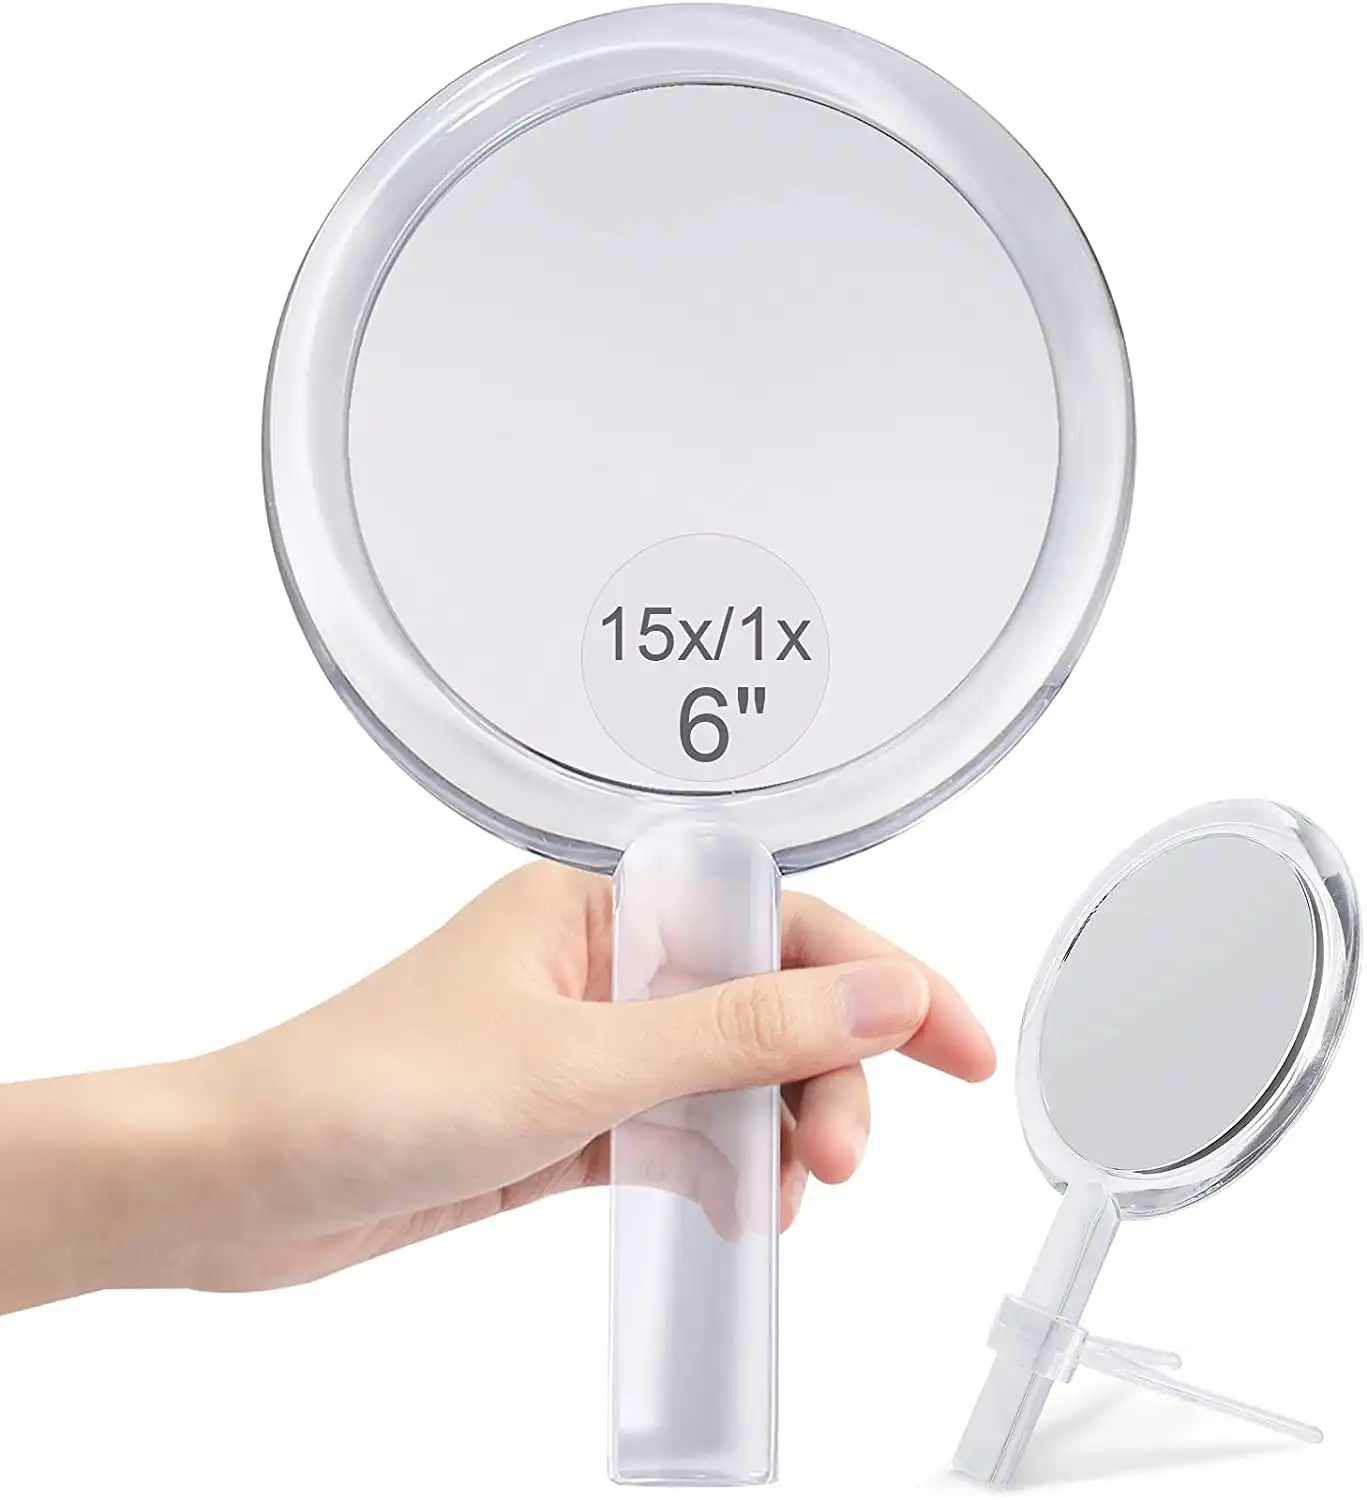 20X Magnifying Hand Mirror Two Sided Use for Makeup Application (15 cm, Silver)